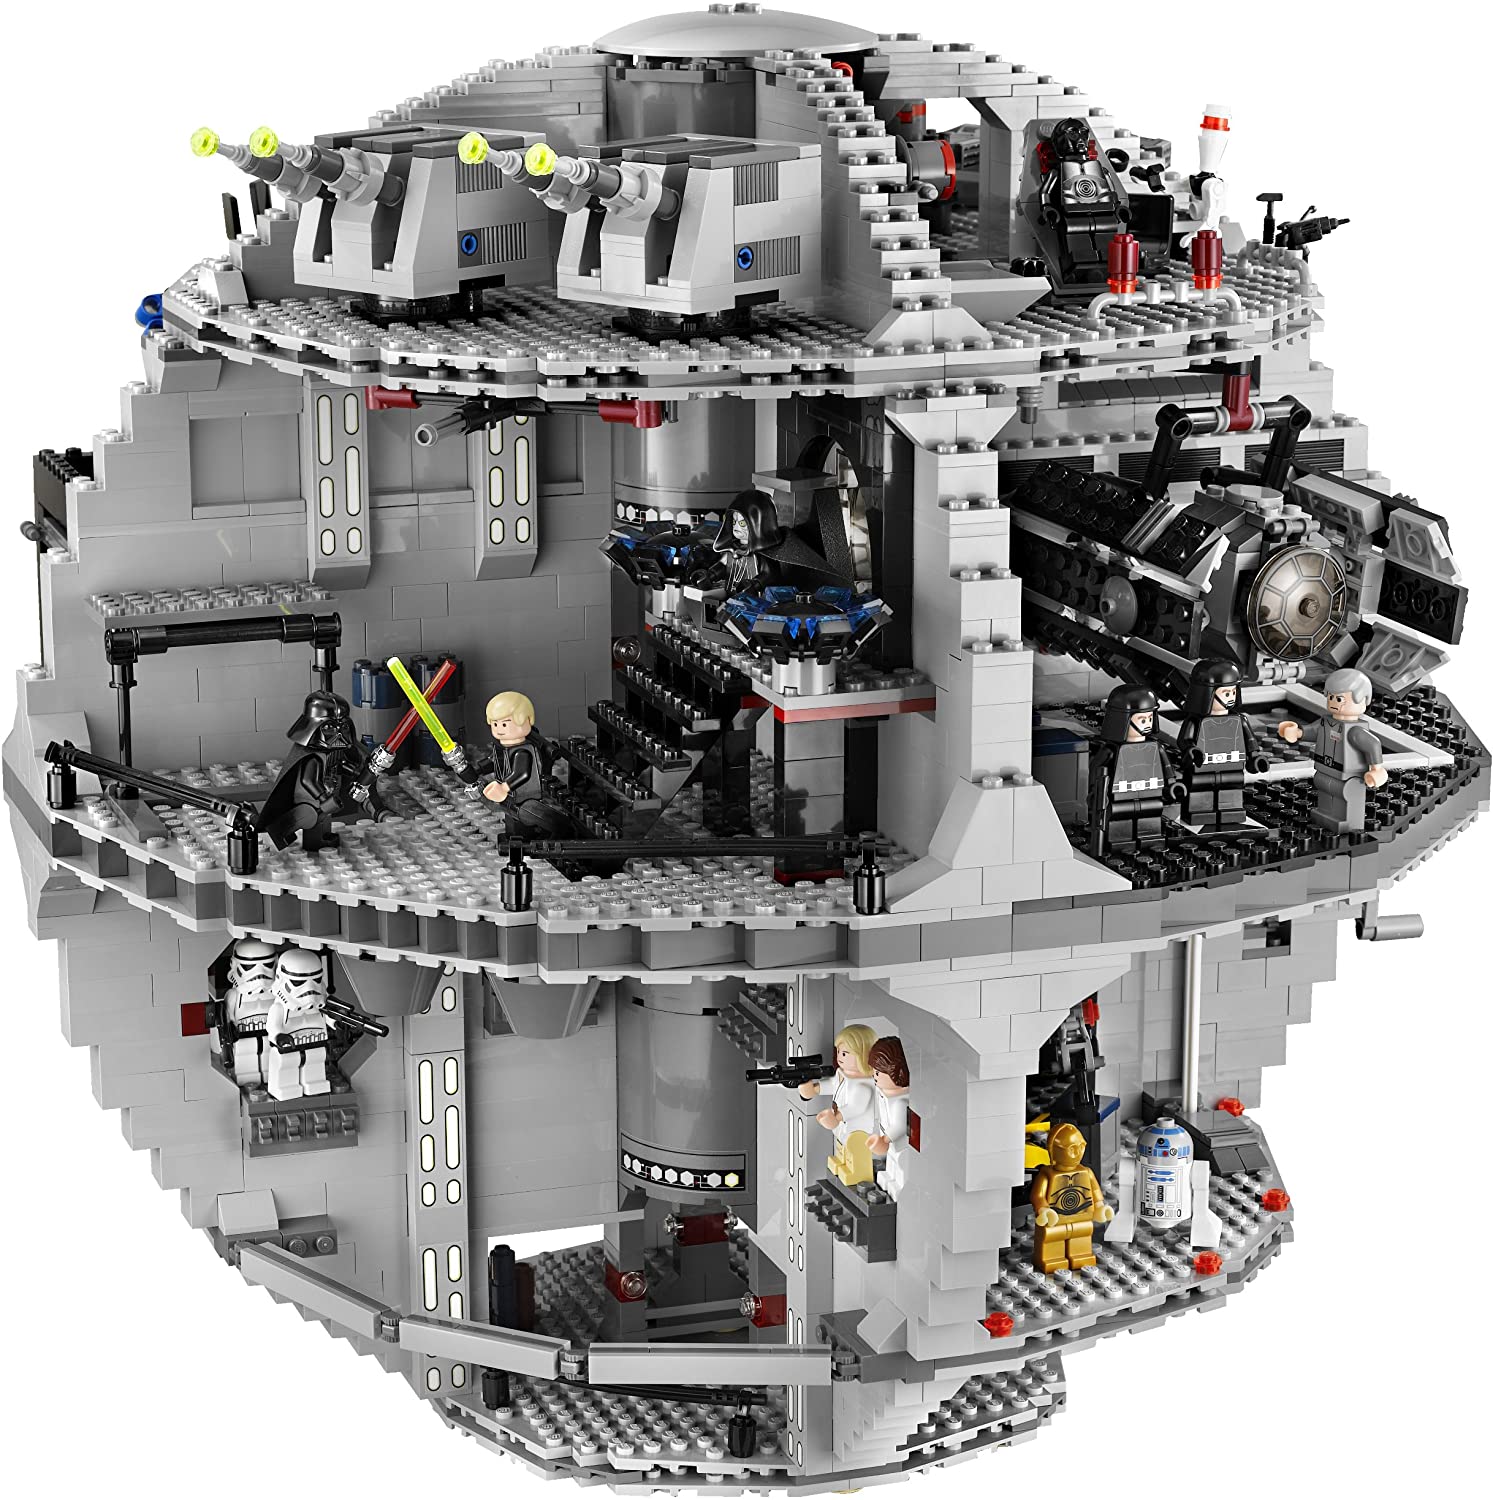 These Are The 14 Challenging Lego Sets To Build -